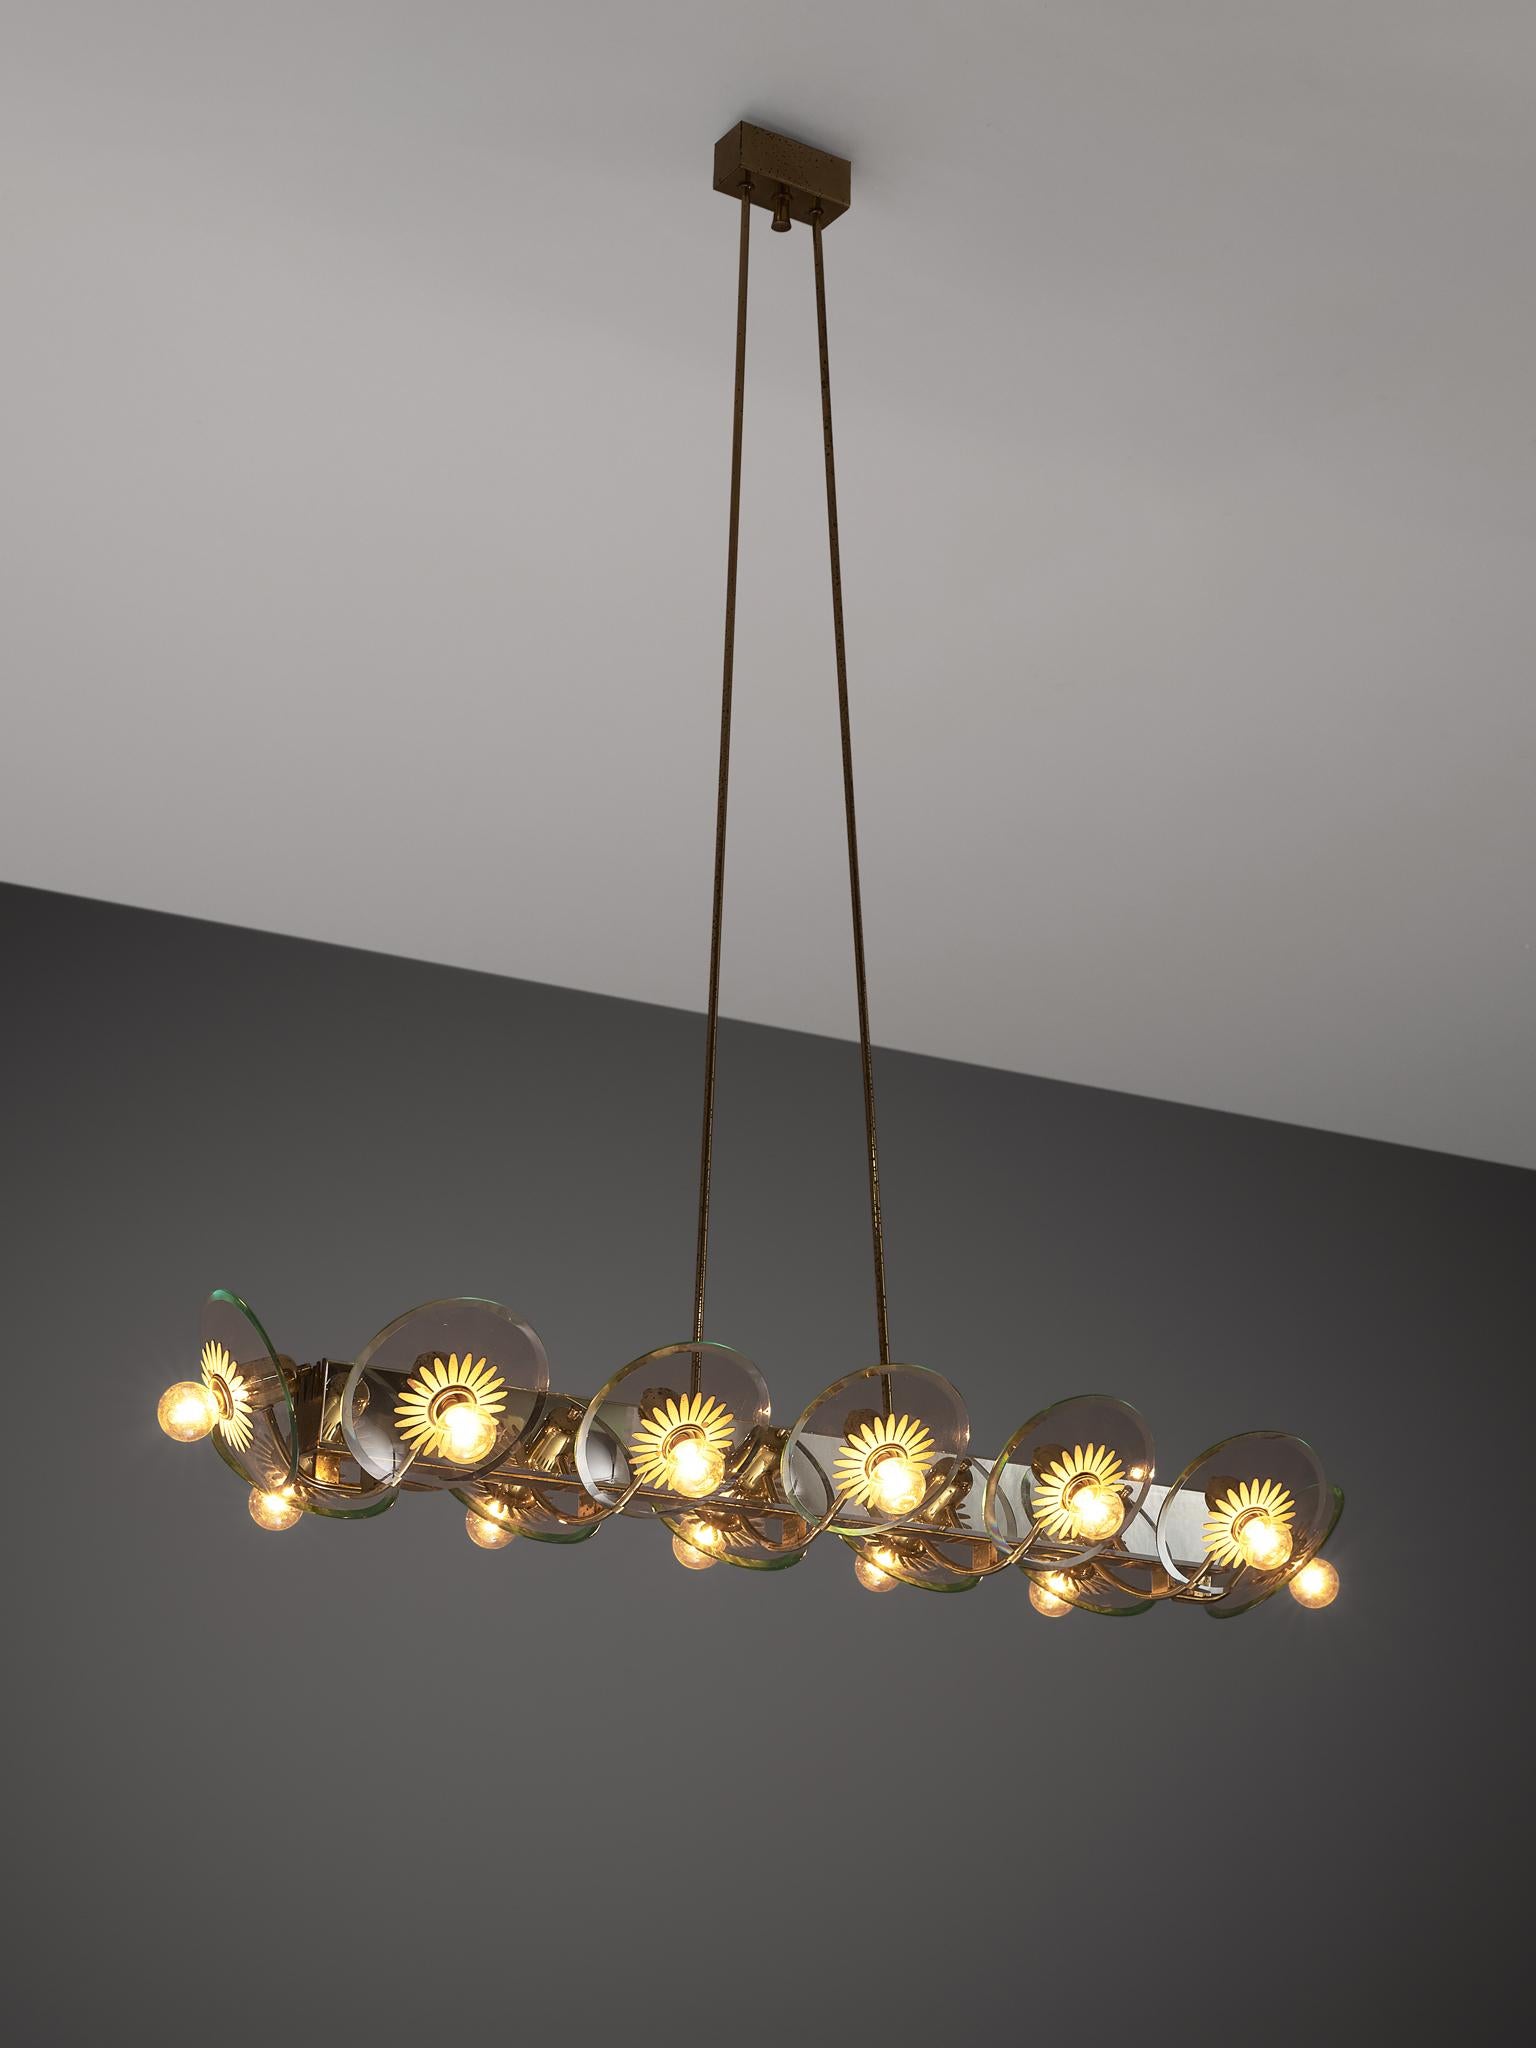 Pietro Chiesa for Fontana Arte, chandelier, brass and glass, Italy, 1940s.

This large chandelier by Italian designer Pietro Chiesa consists of twelve lights with brass and lacquered brass structure. The lights are attached to glass bowls. The